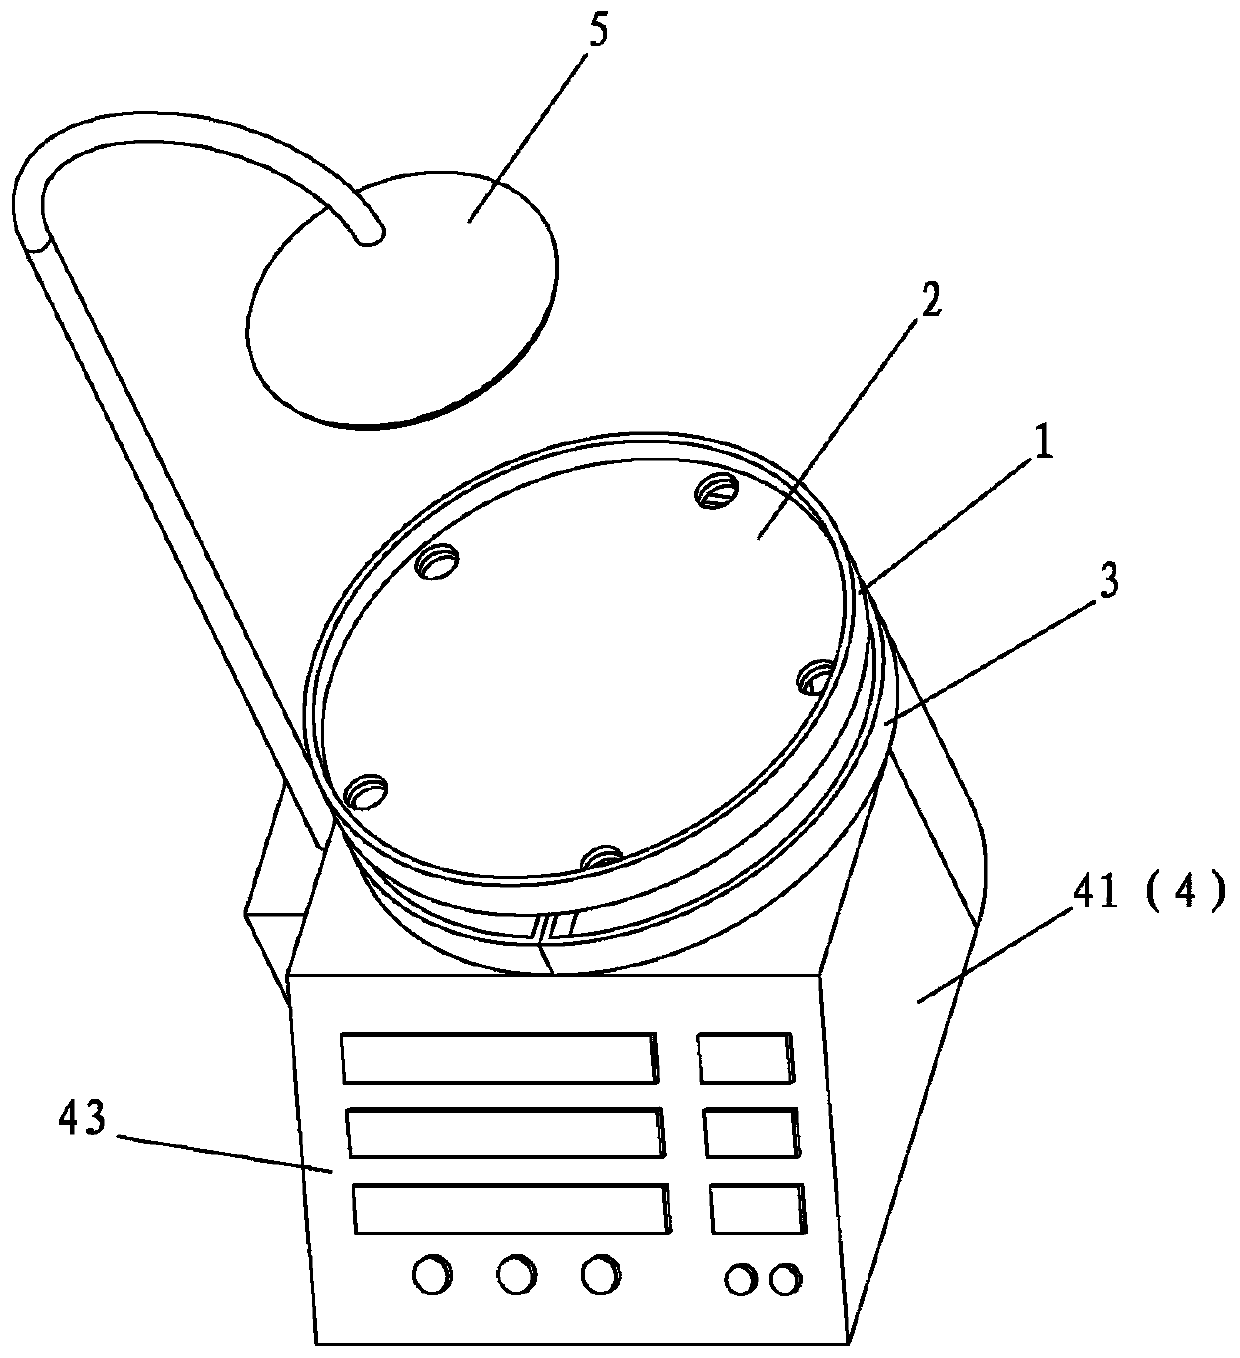 A metal droplet information collection device and method thereof